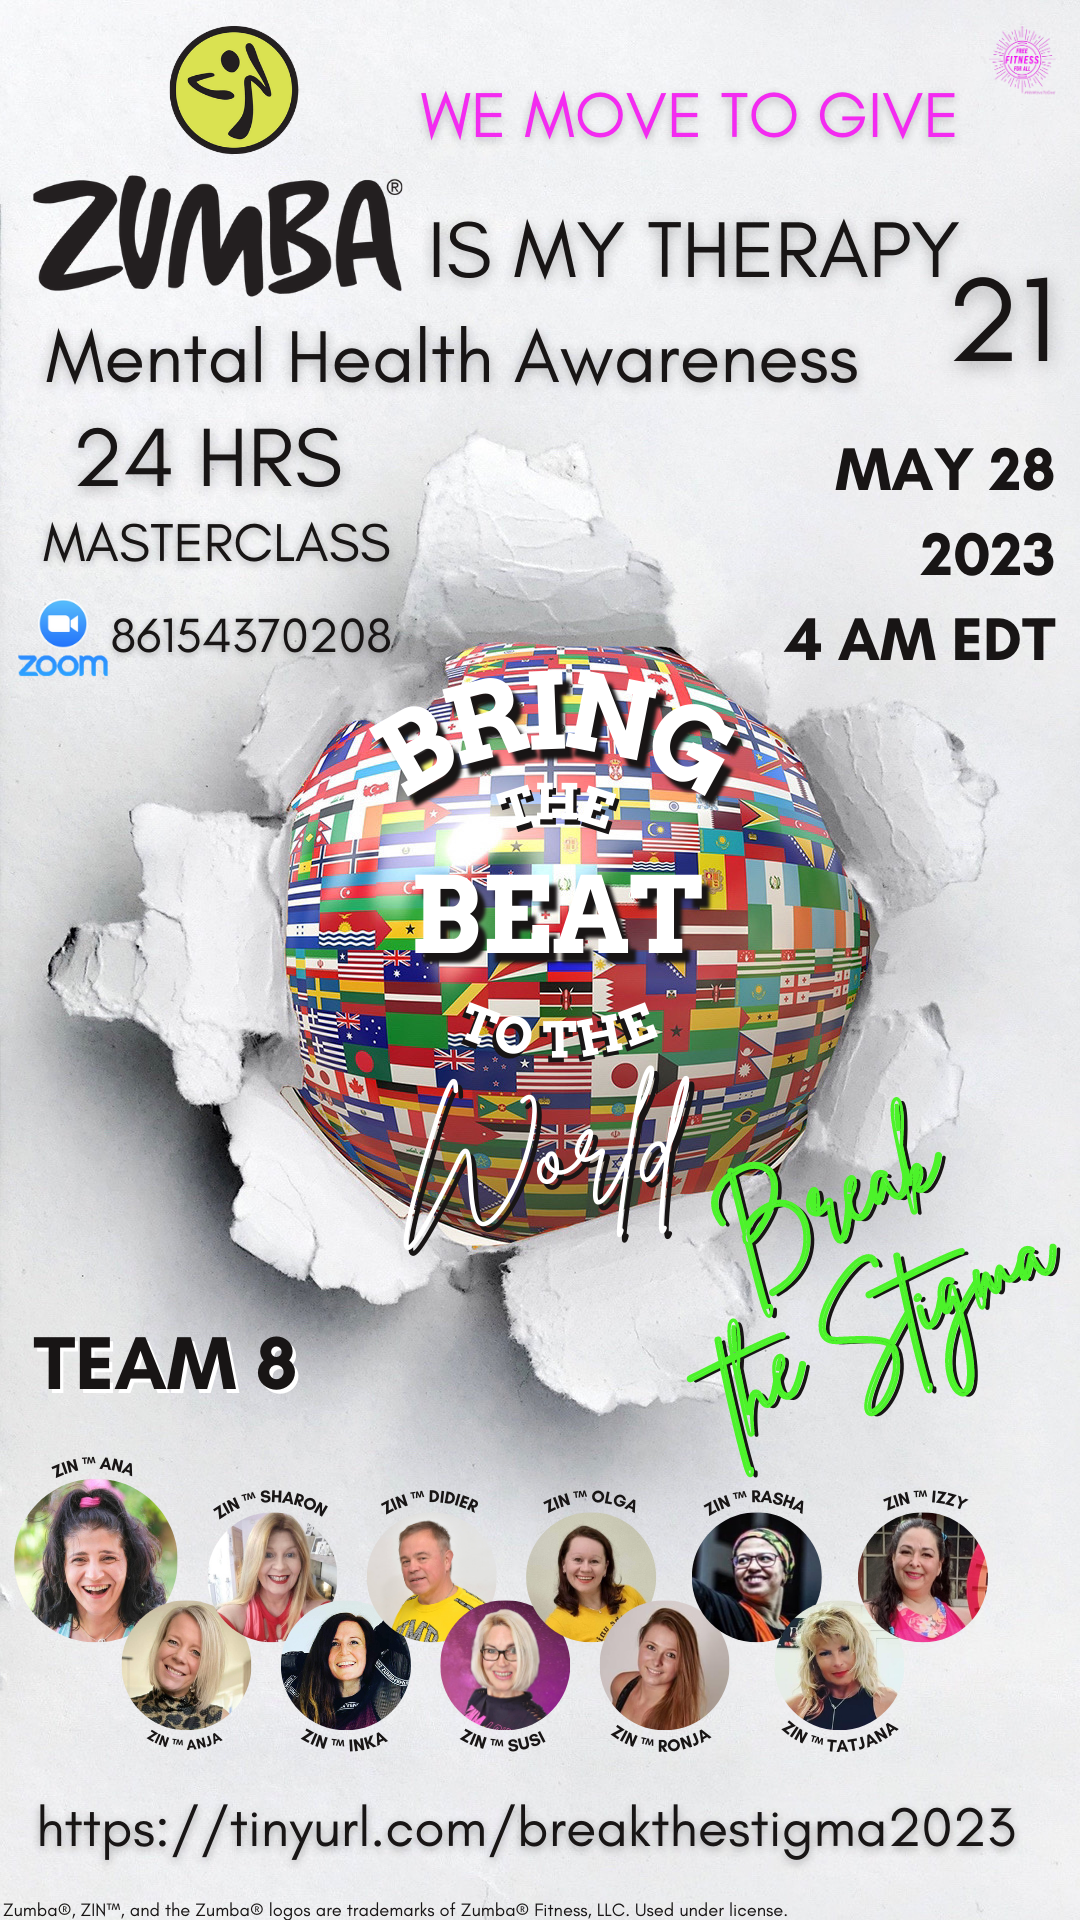 Team 8 - May 28th 4 AM EDT